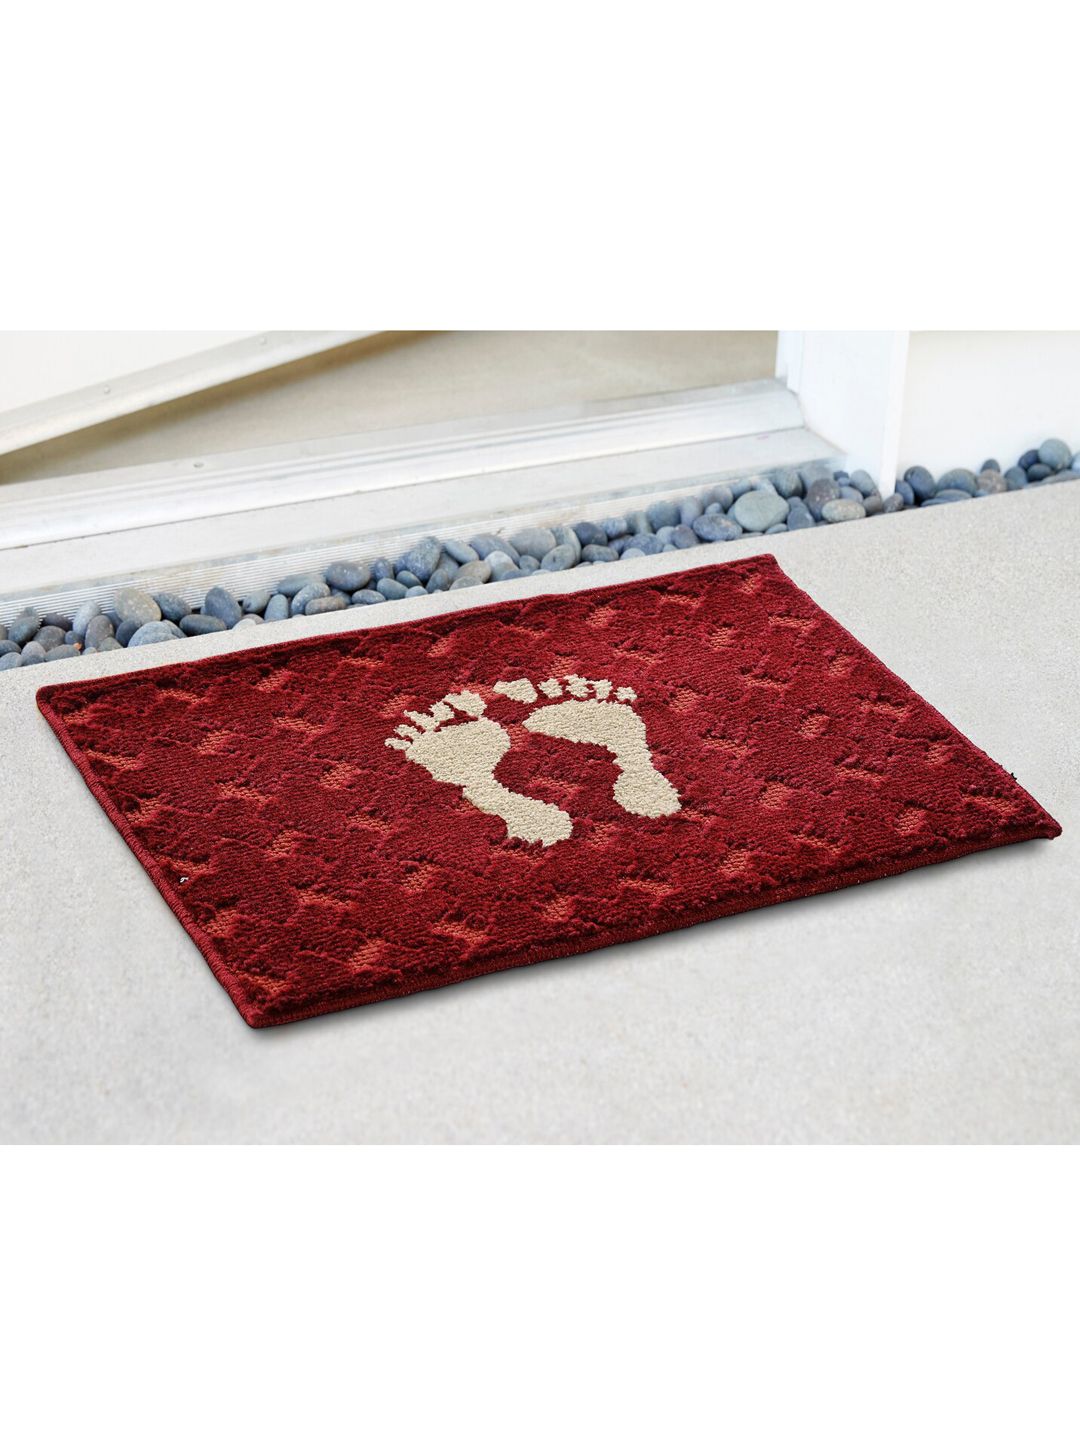 Saral Home Set Of 2 Printed Anti-Skid Cotton Doormats Price in India